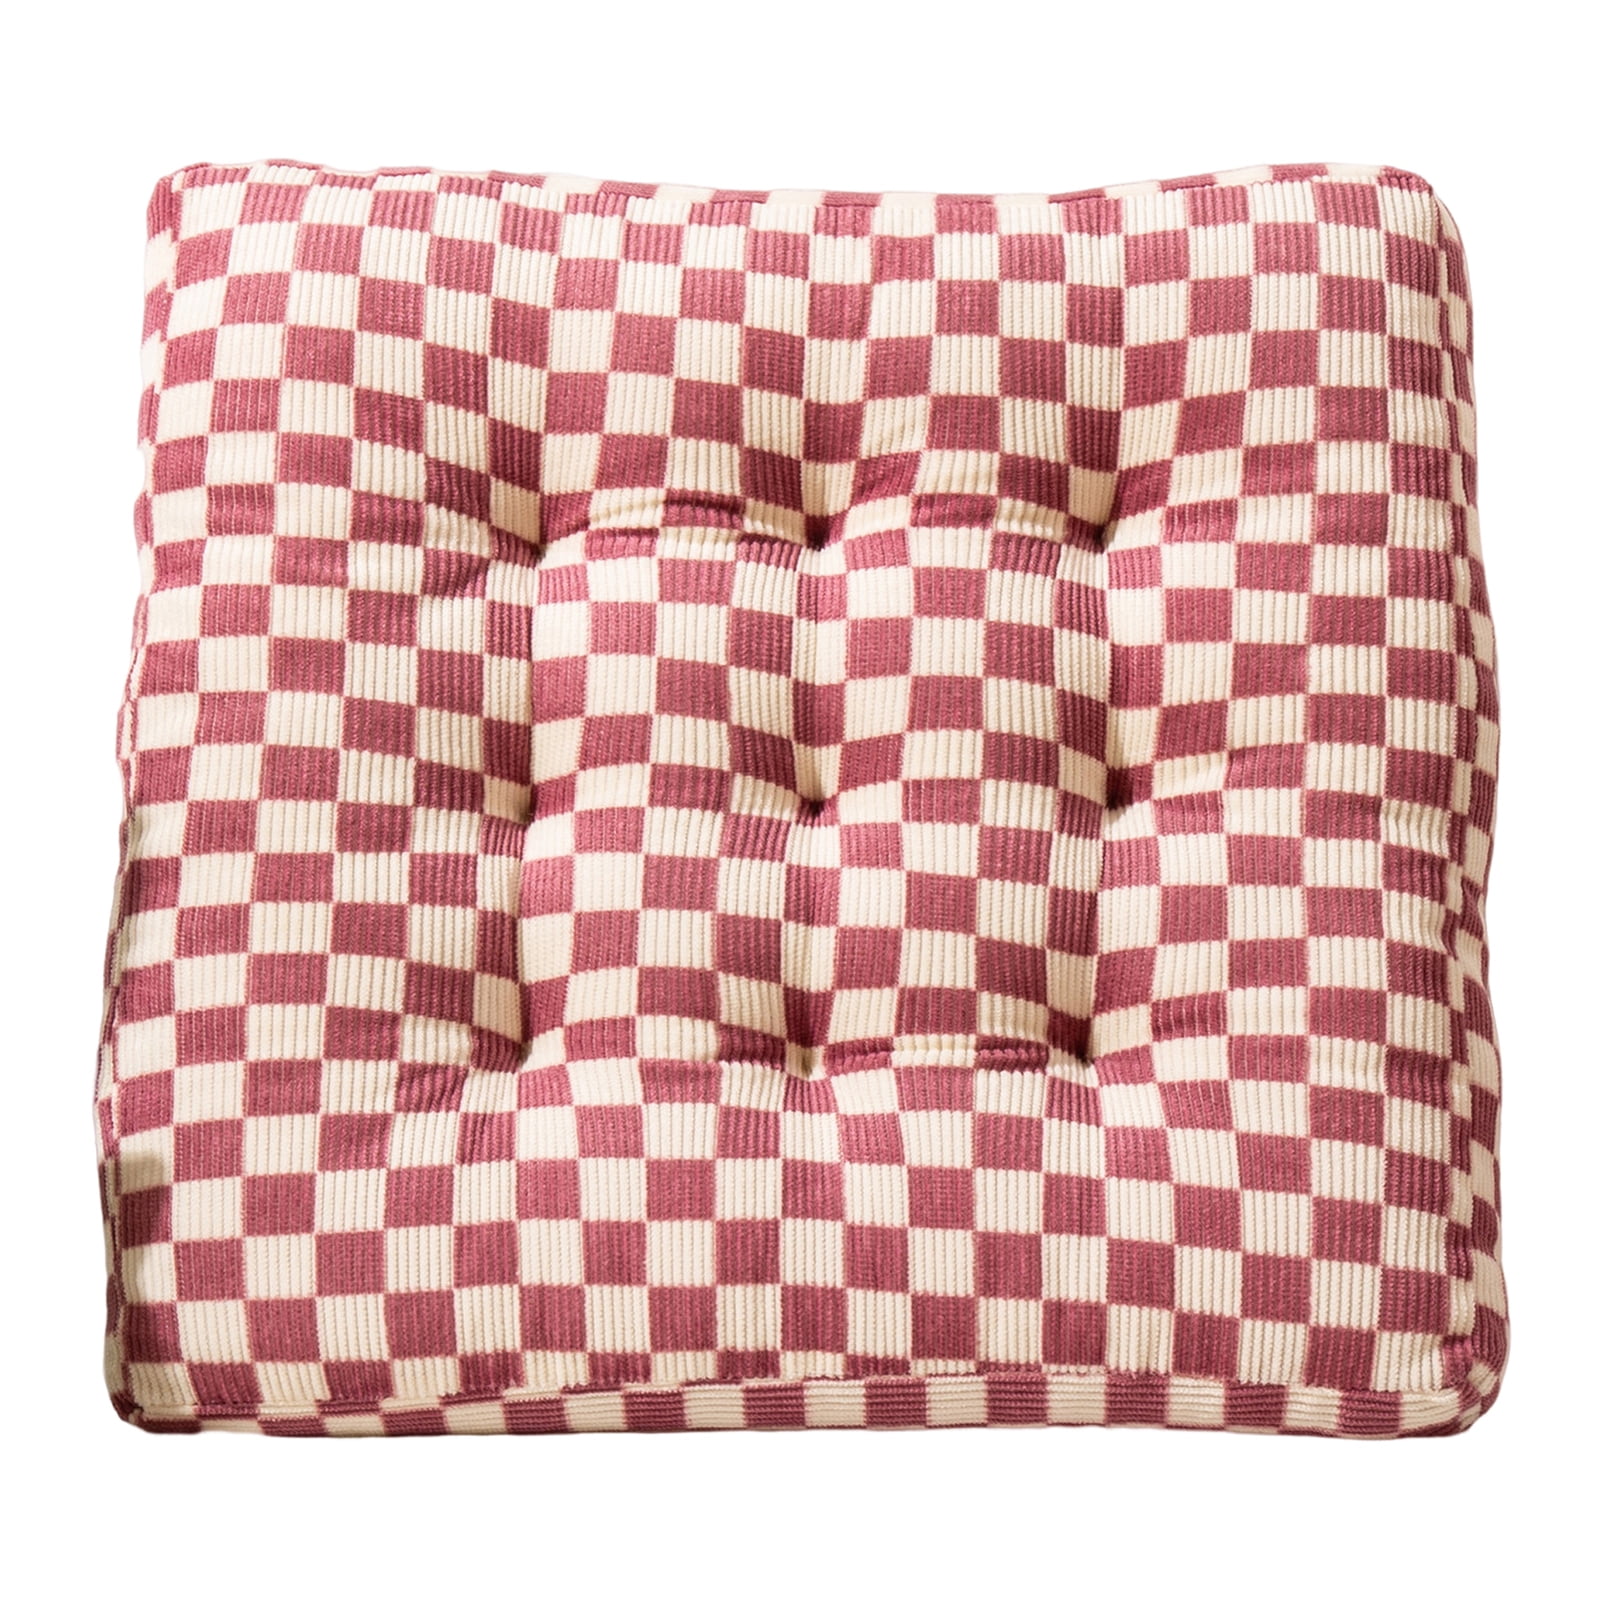  SXFYHXY Heated Chair Cushion Cushion Lazy Sofa Office Chair  Cushion Warm Floor Cute Seat Pad for Dining Room Bedroom Comfort Chair for  Health : Home & Kitchen